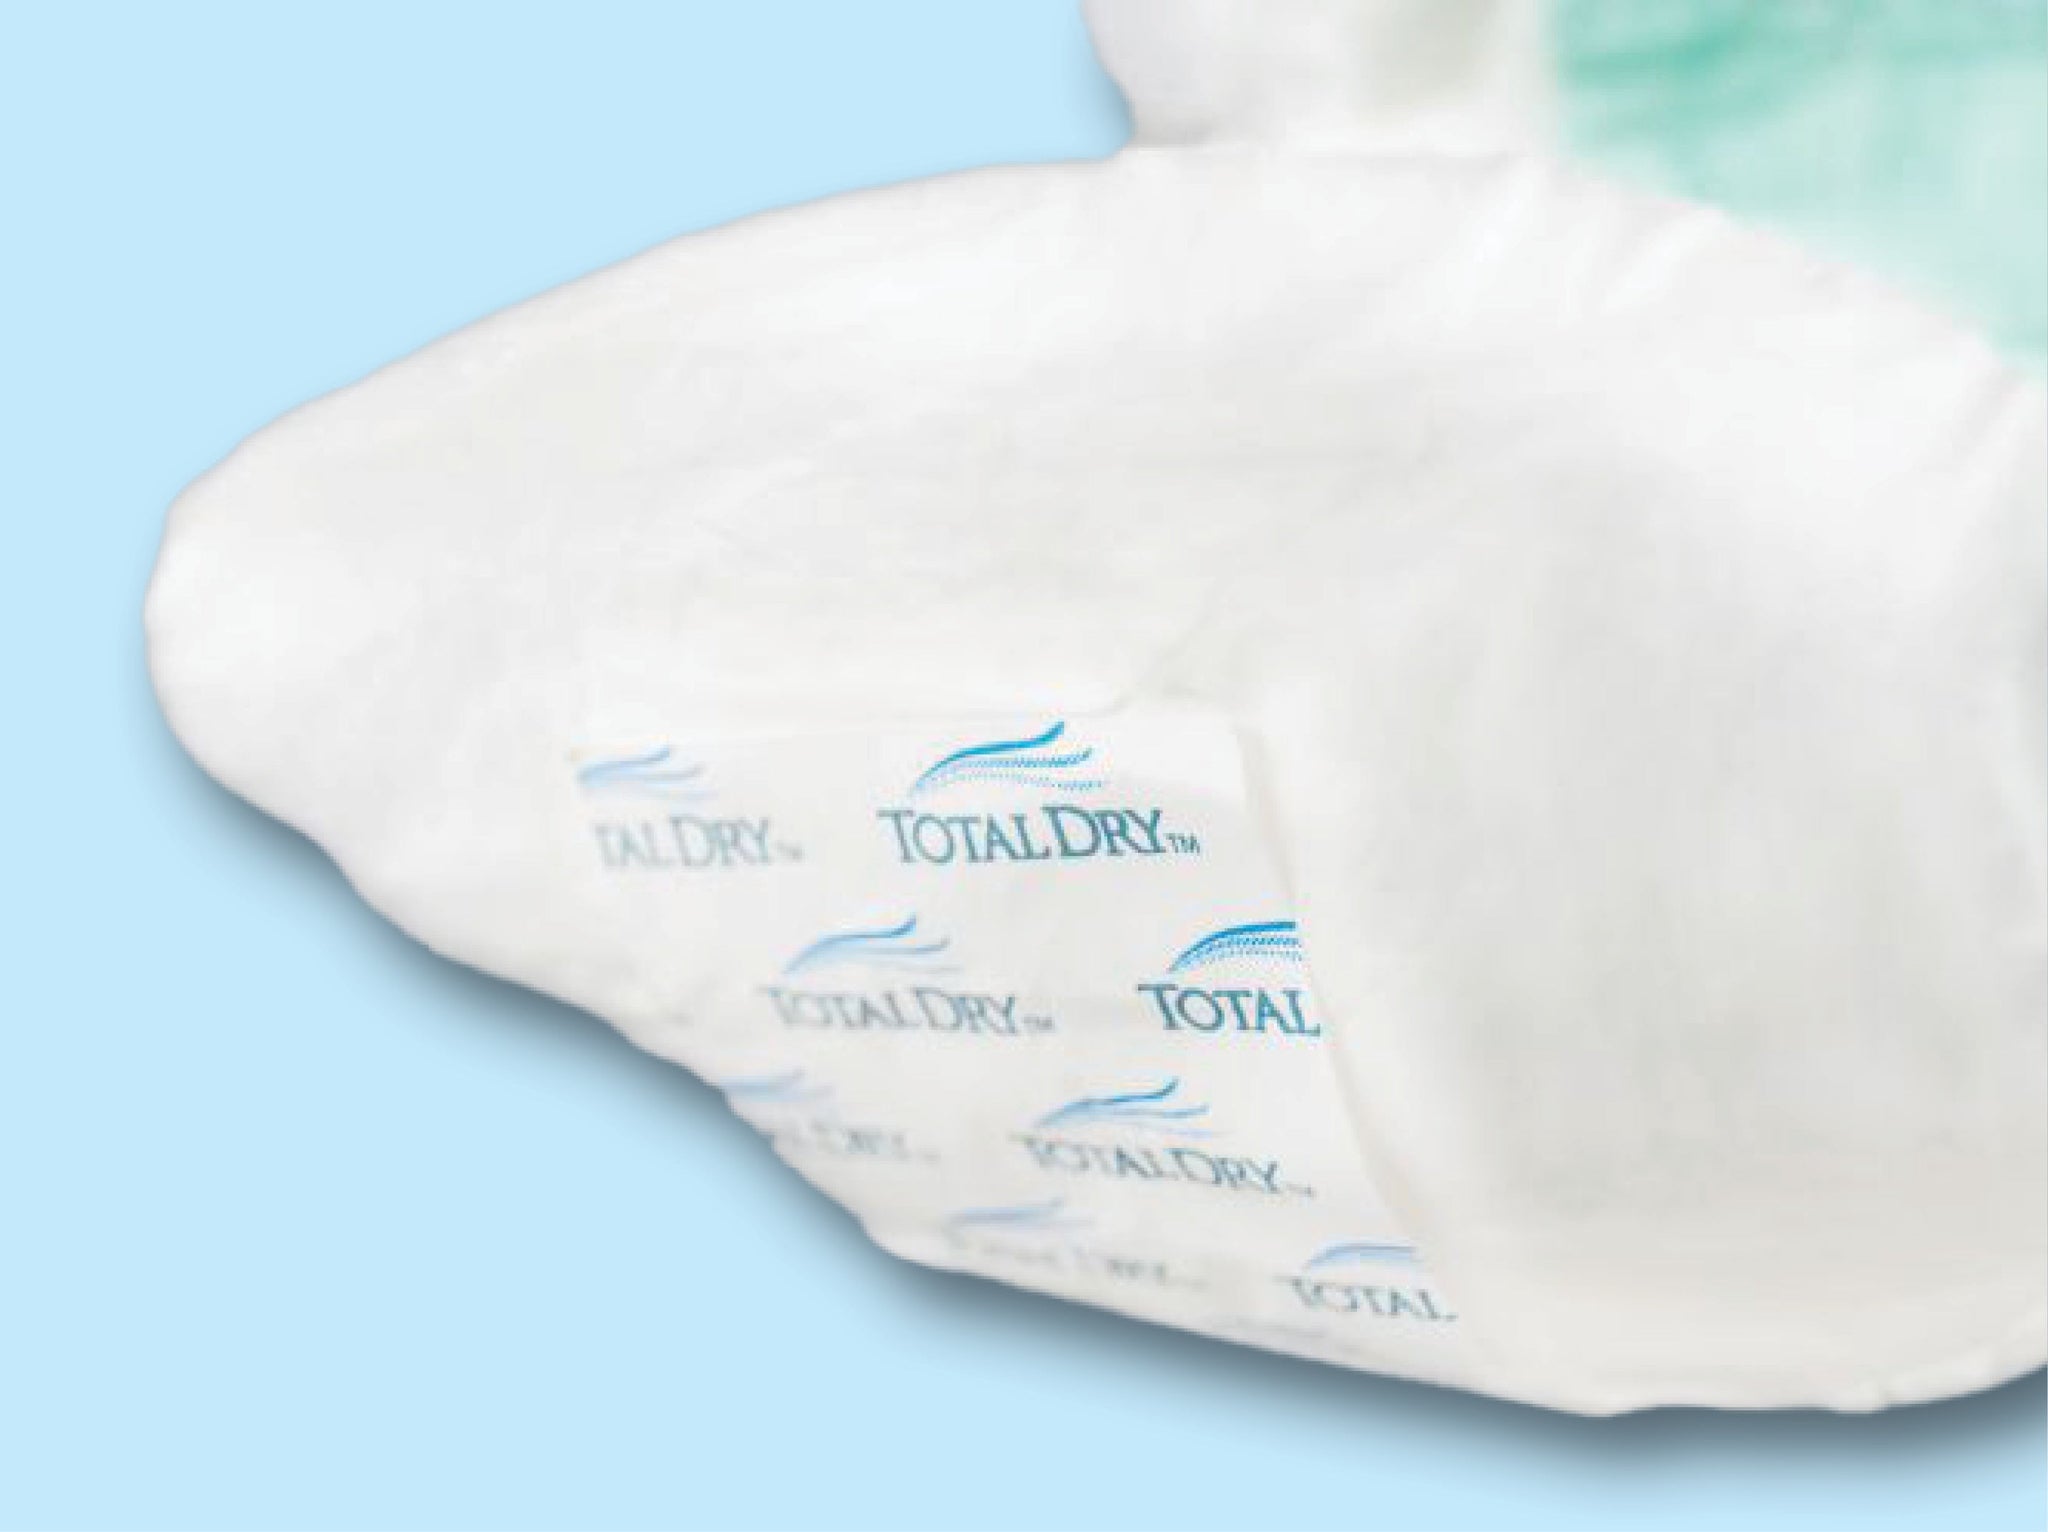 TotalDry Max-Day Pads Sample (2 Pieces)